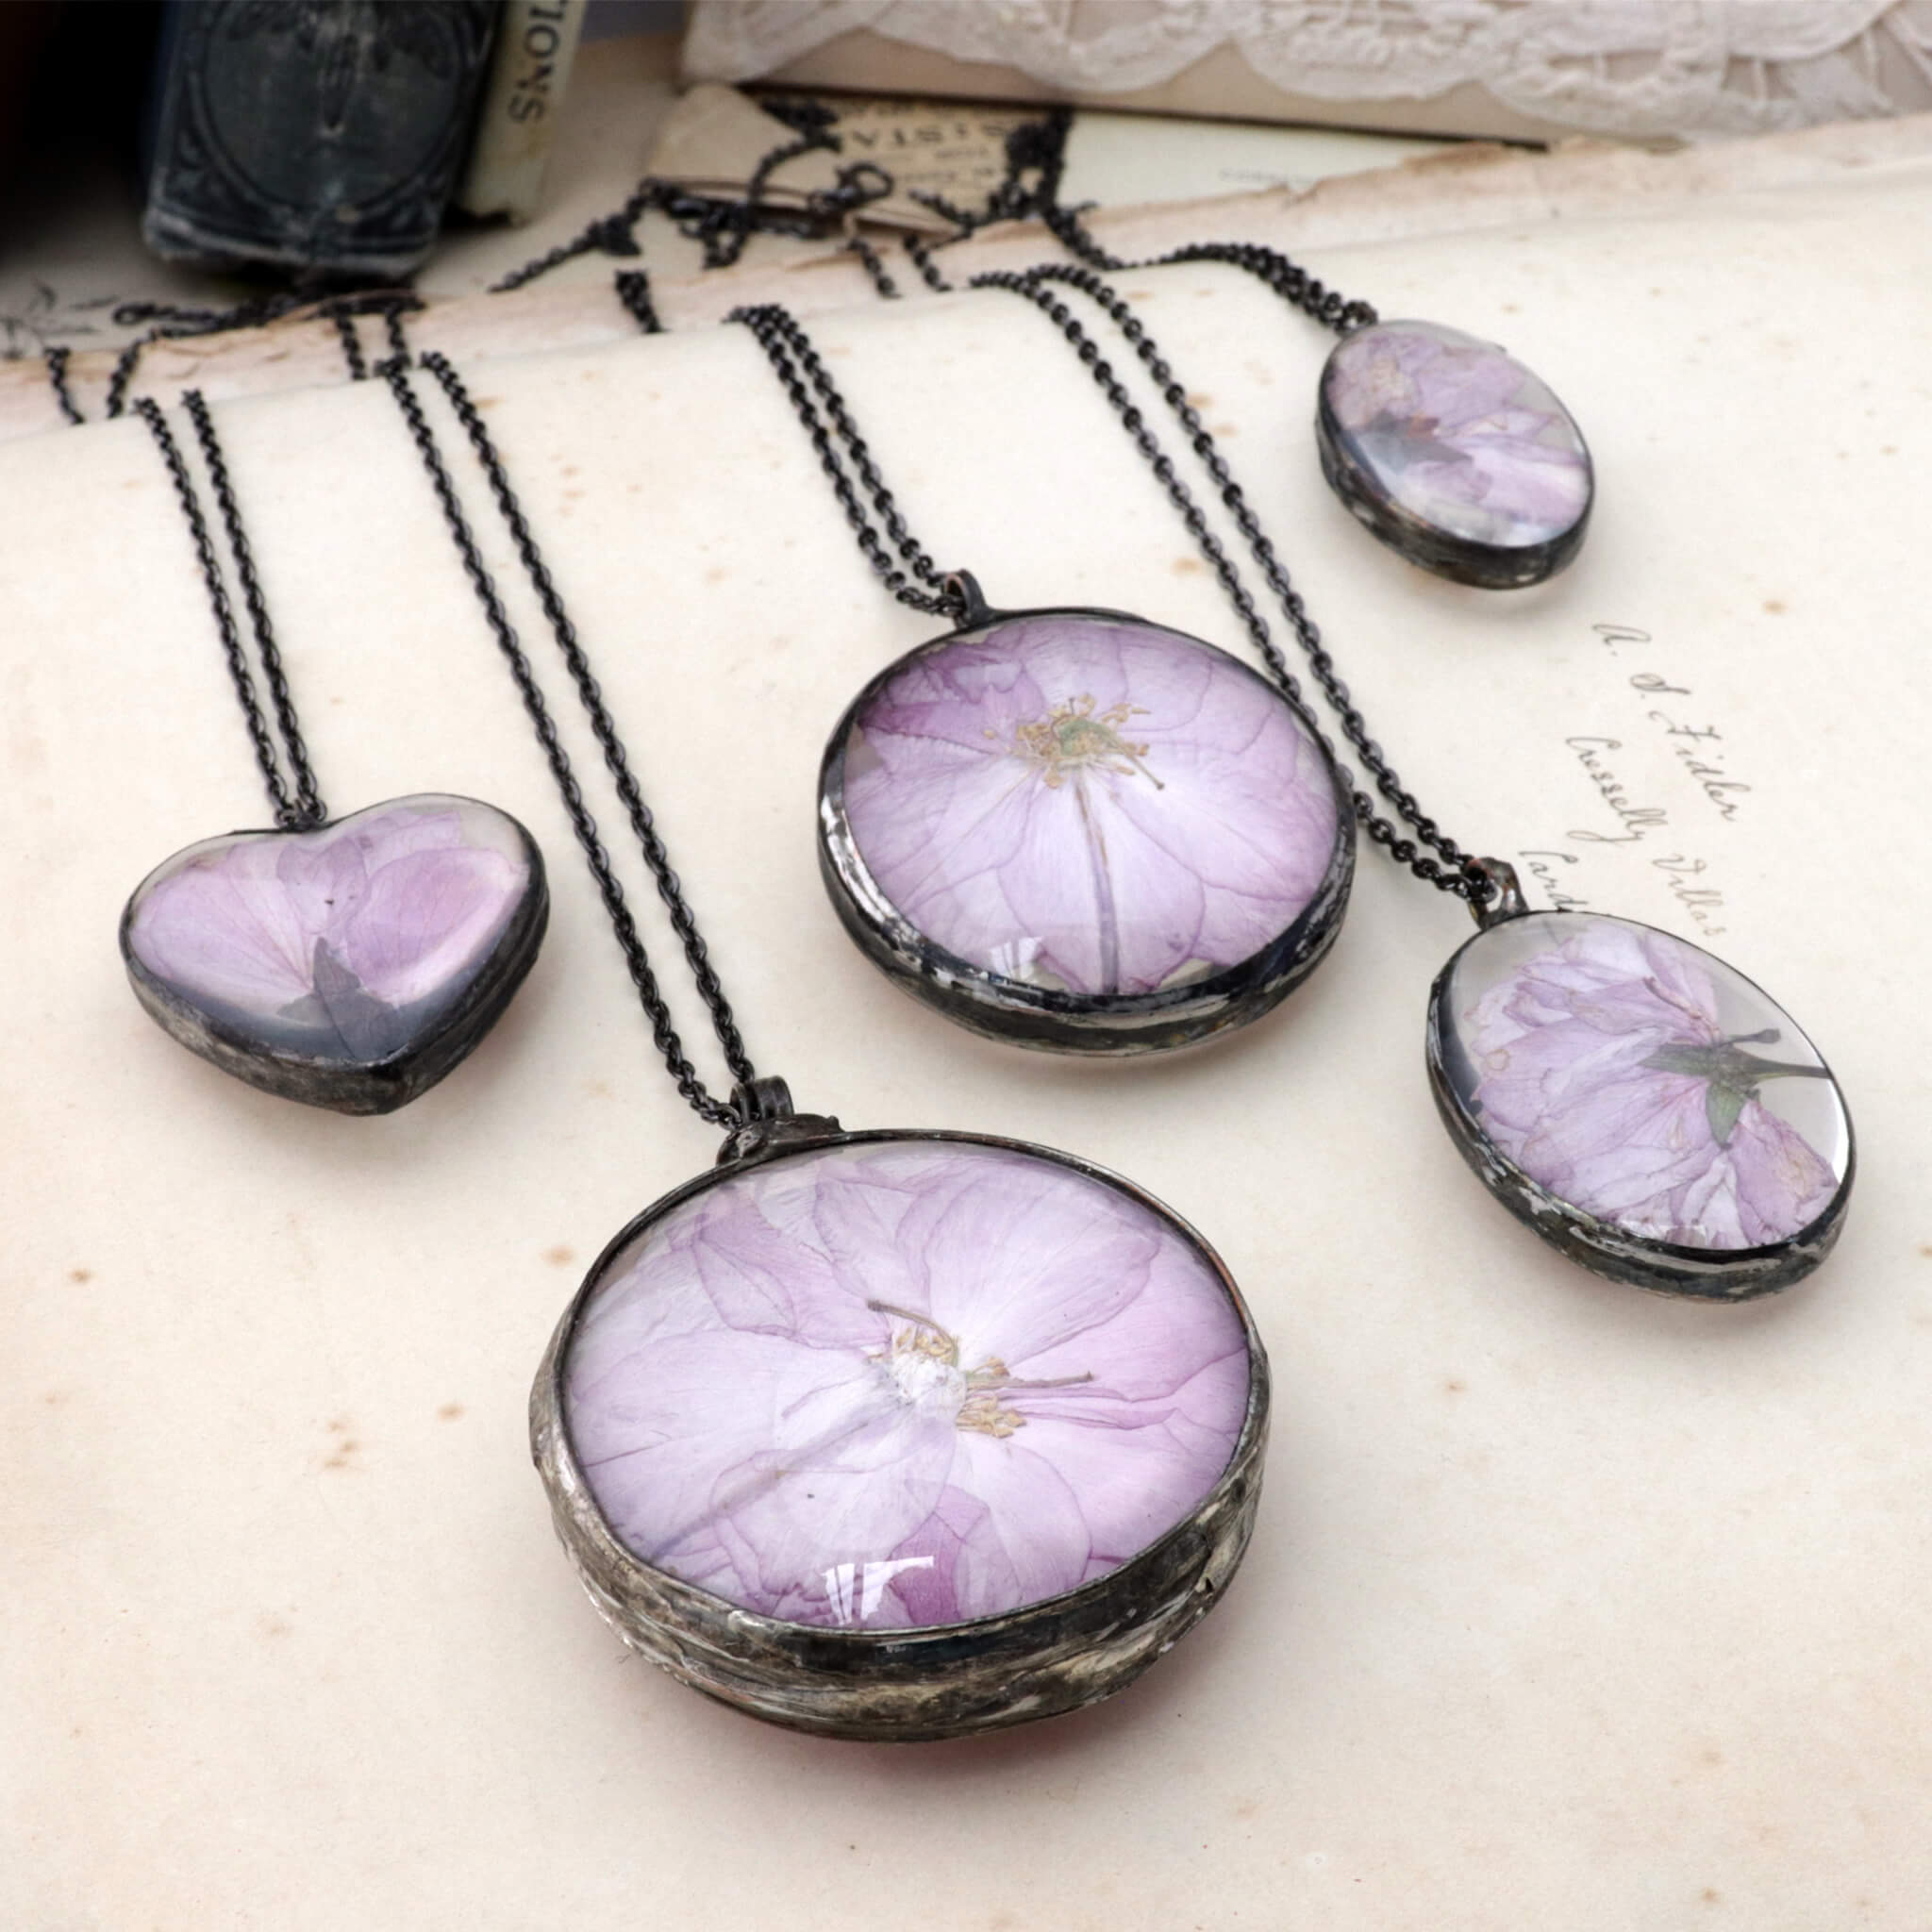 Five cherry blossom necklaces lying side by side on an old book